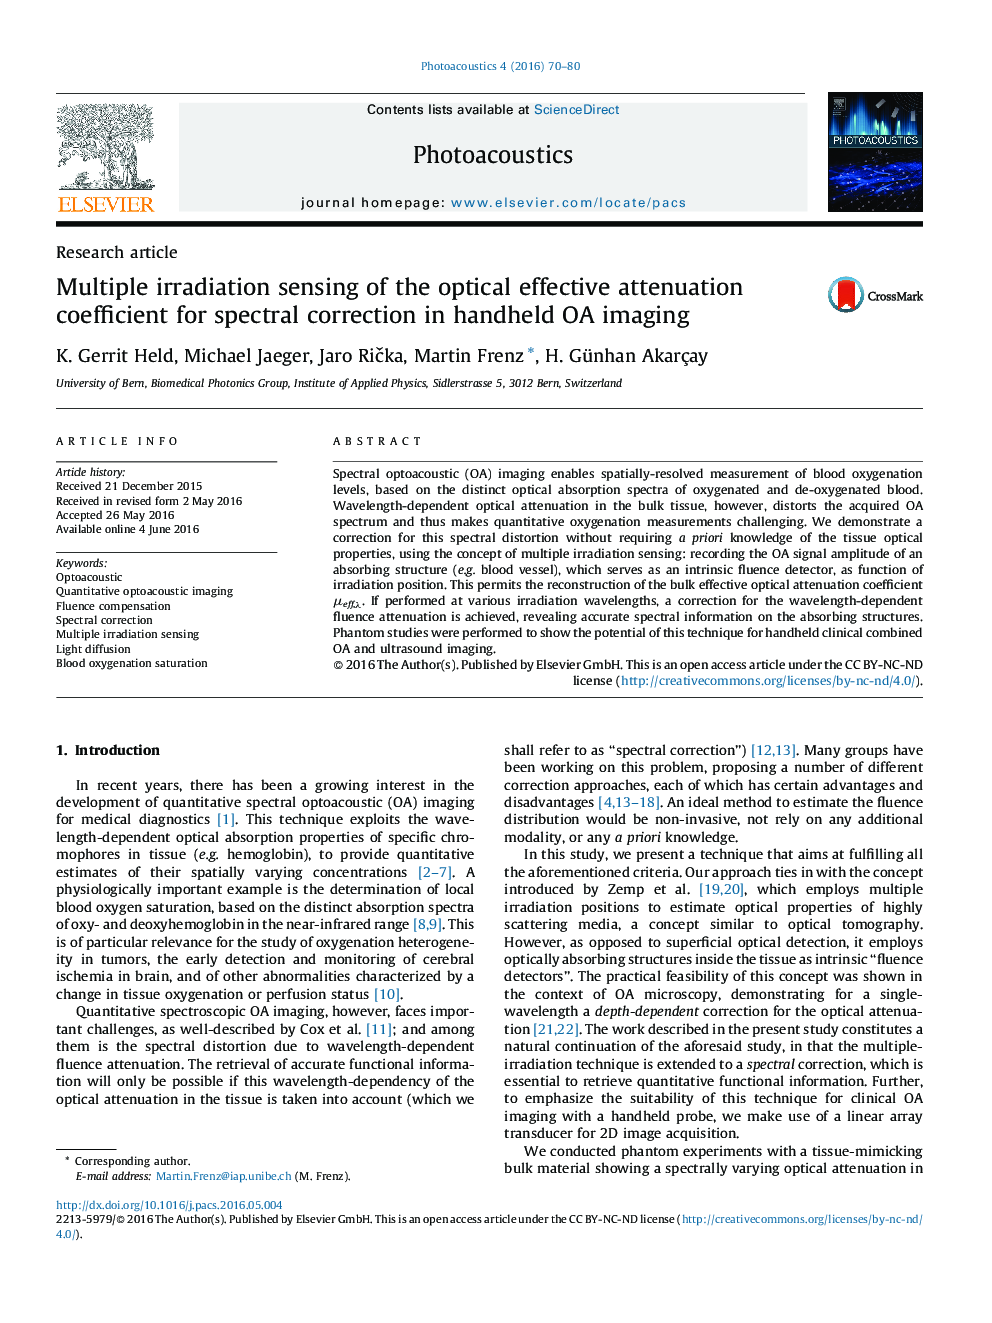 Multiple irradiation sensing of the optical effective attenuation coefficient for spectral correction in handheld OA imaging